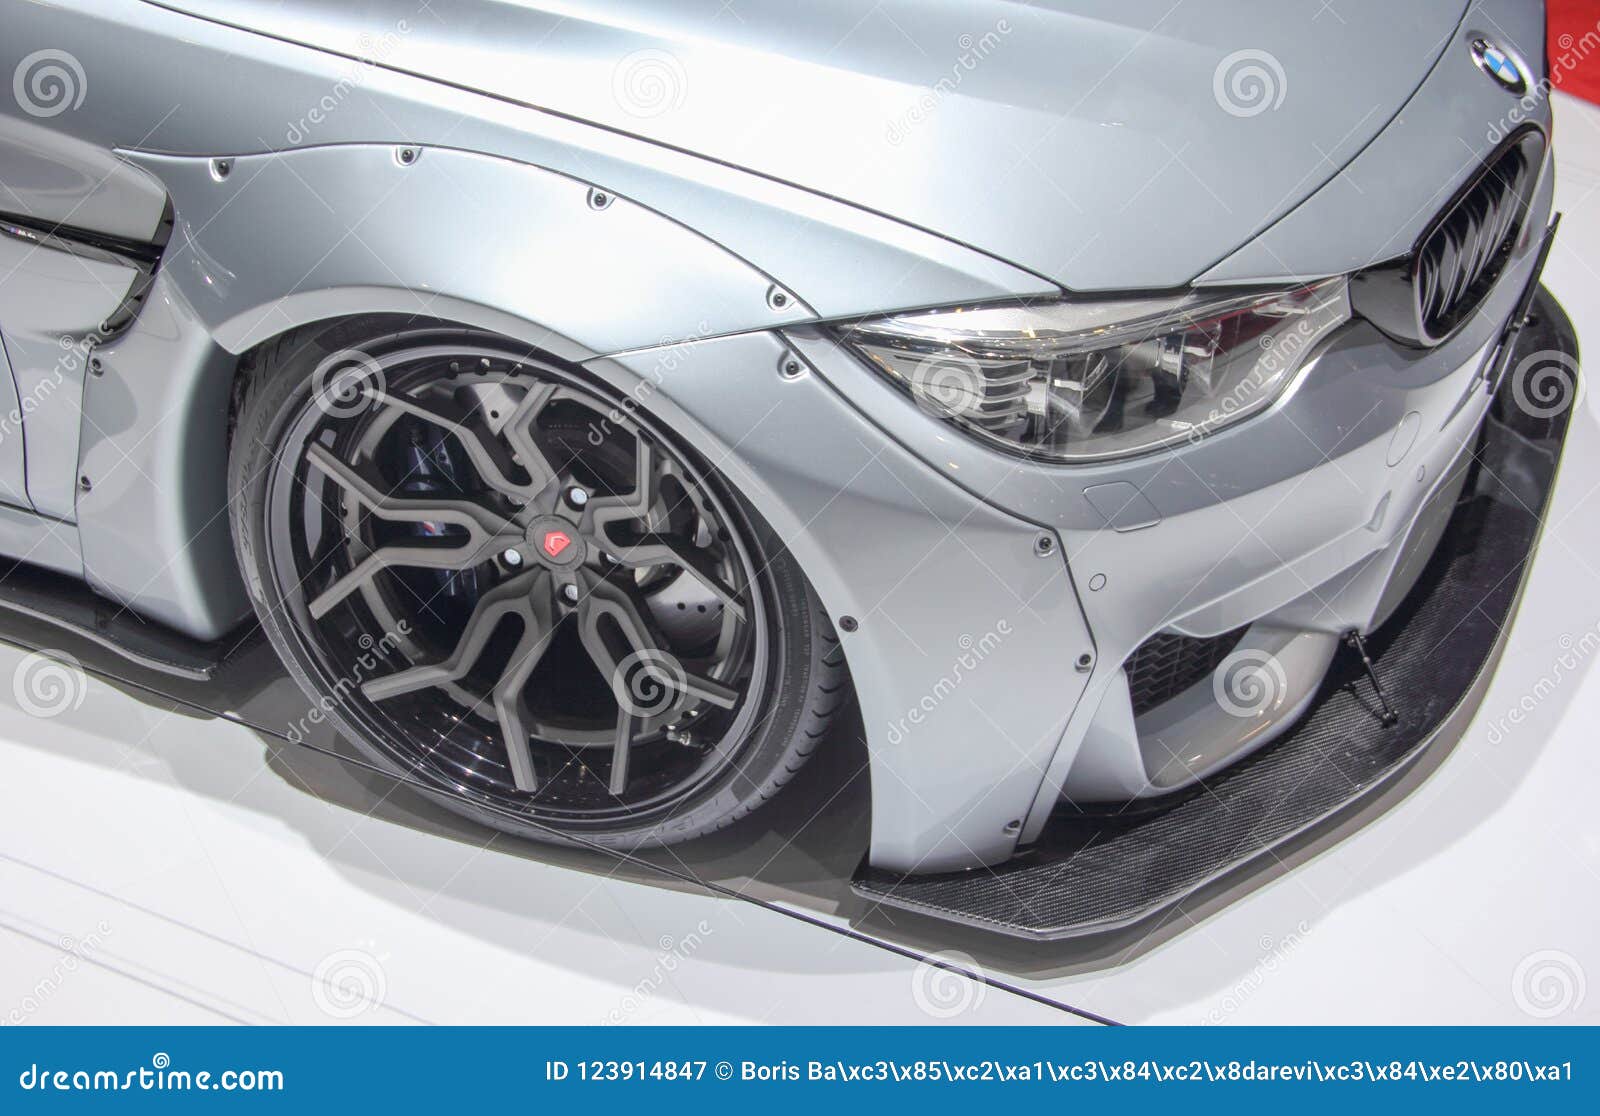 Switzerland; Geneva; March 8, 2018; The Liberty Walk Bmw M4 Right Front  Wheel; The 88Th International Motor Show In Geneva From 8 Editorial  Photography - Image Of Motor, Bumper: 123914847